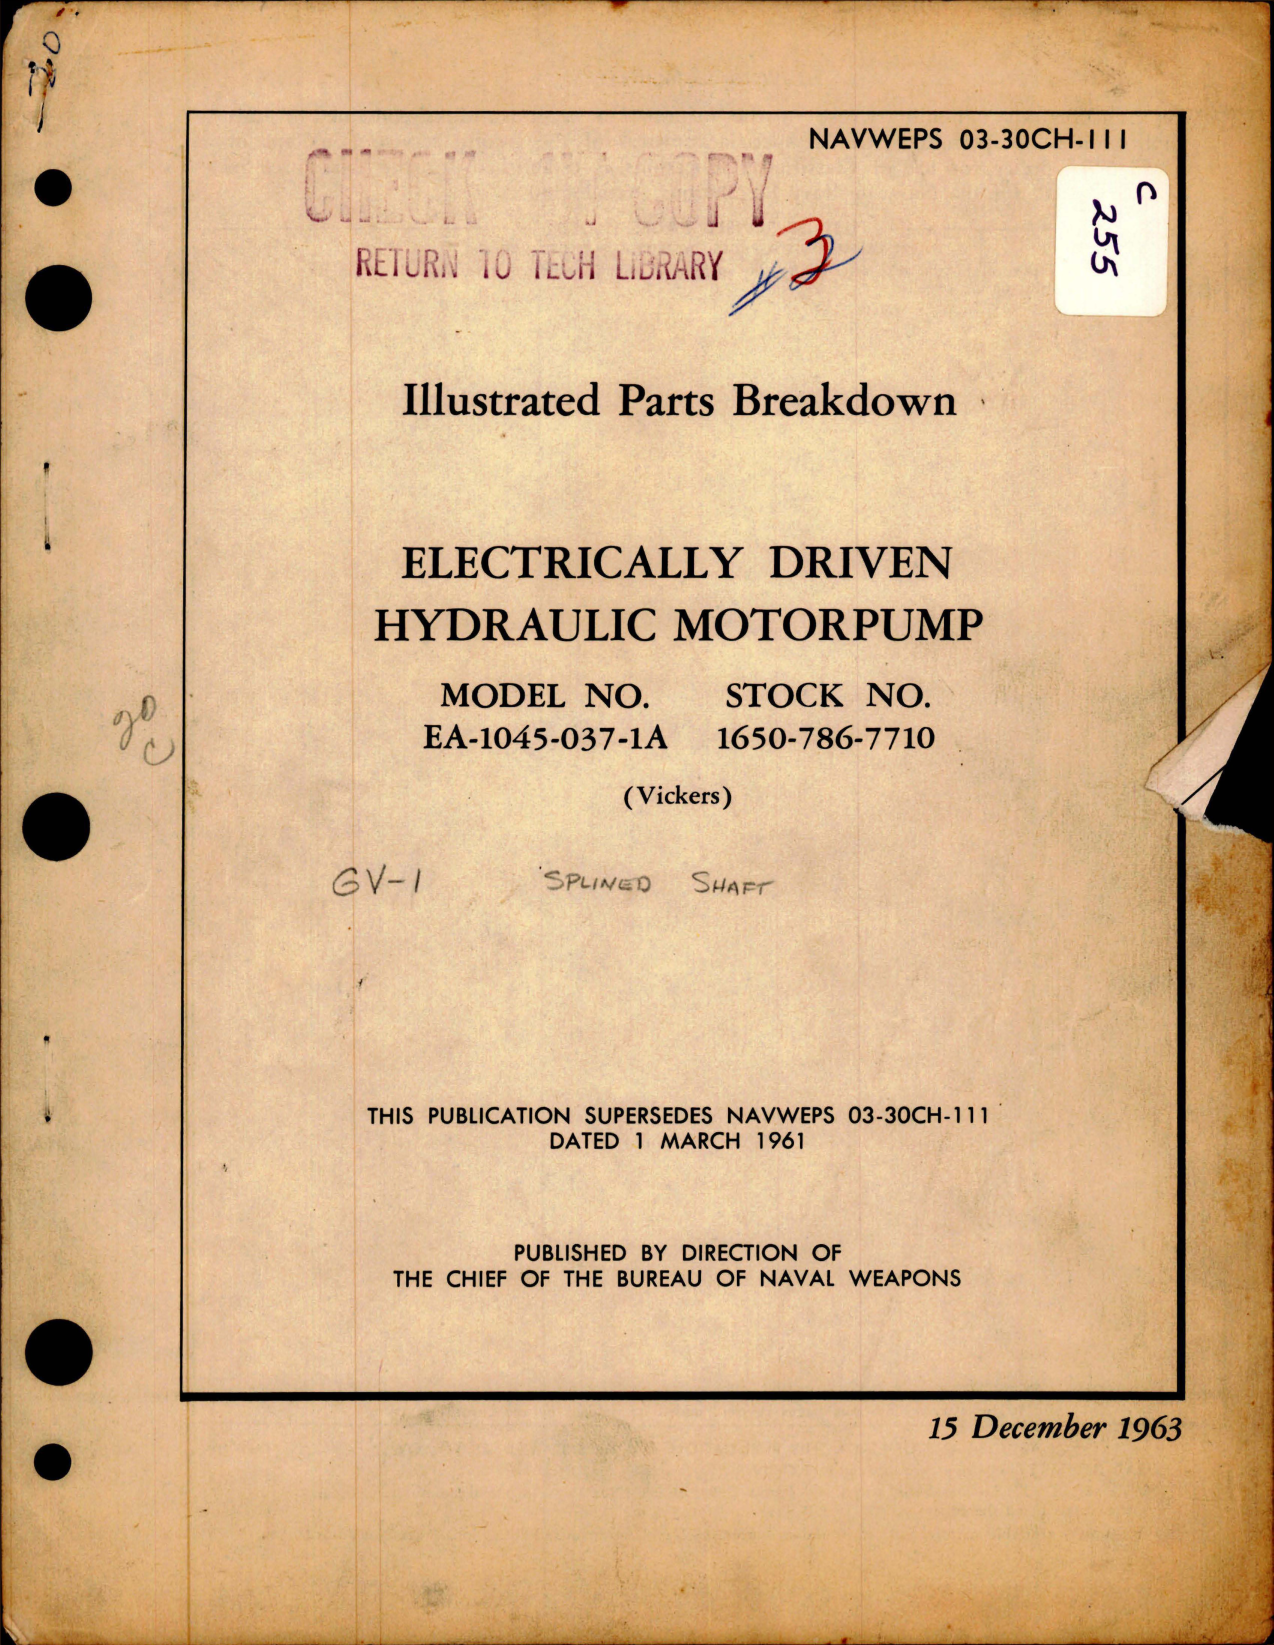 Sample page 1 from AirCorps Library document: Illustrated Parts Breakdown for Electrically Driven Hydraulic Motorpump - Model EA-1045-037-1A 